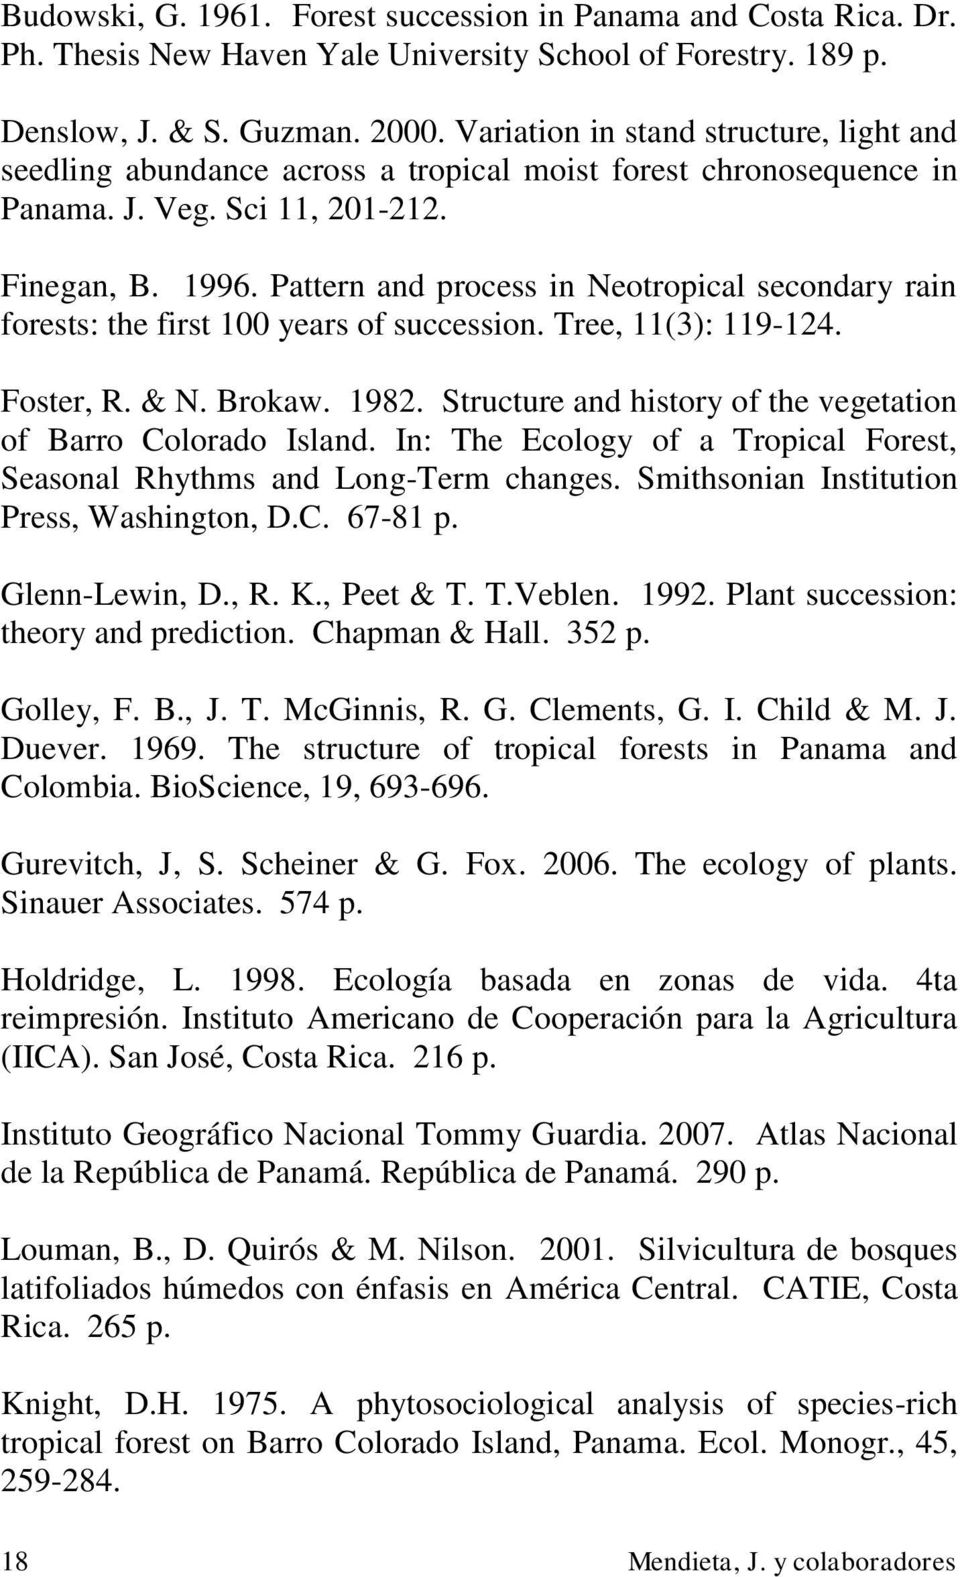 Pattern and process in Neotropical secondary rain forests: the first 100 years of succession. Tree, 11(3): 119-124. Foster, R. & N. Brokaw. 1982.